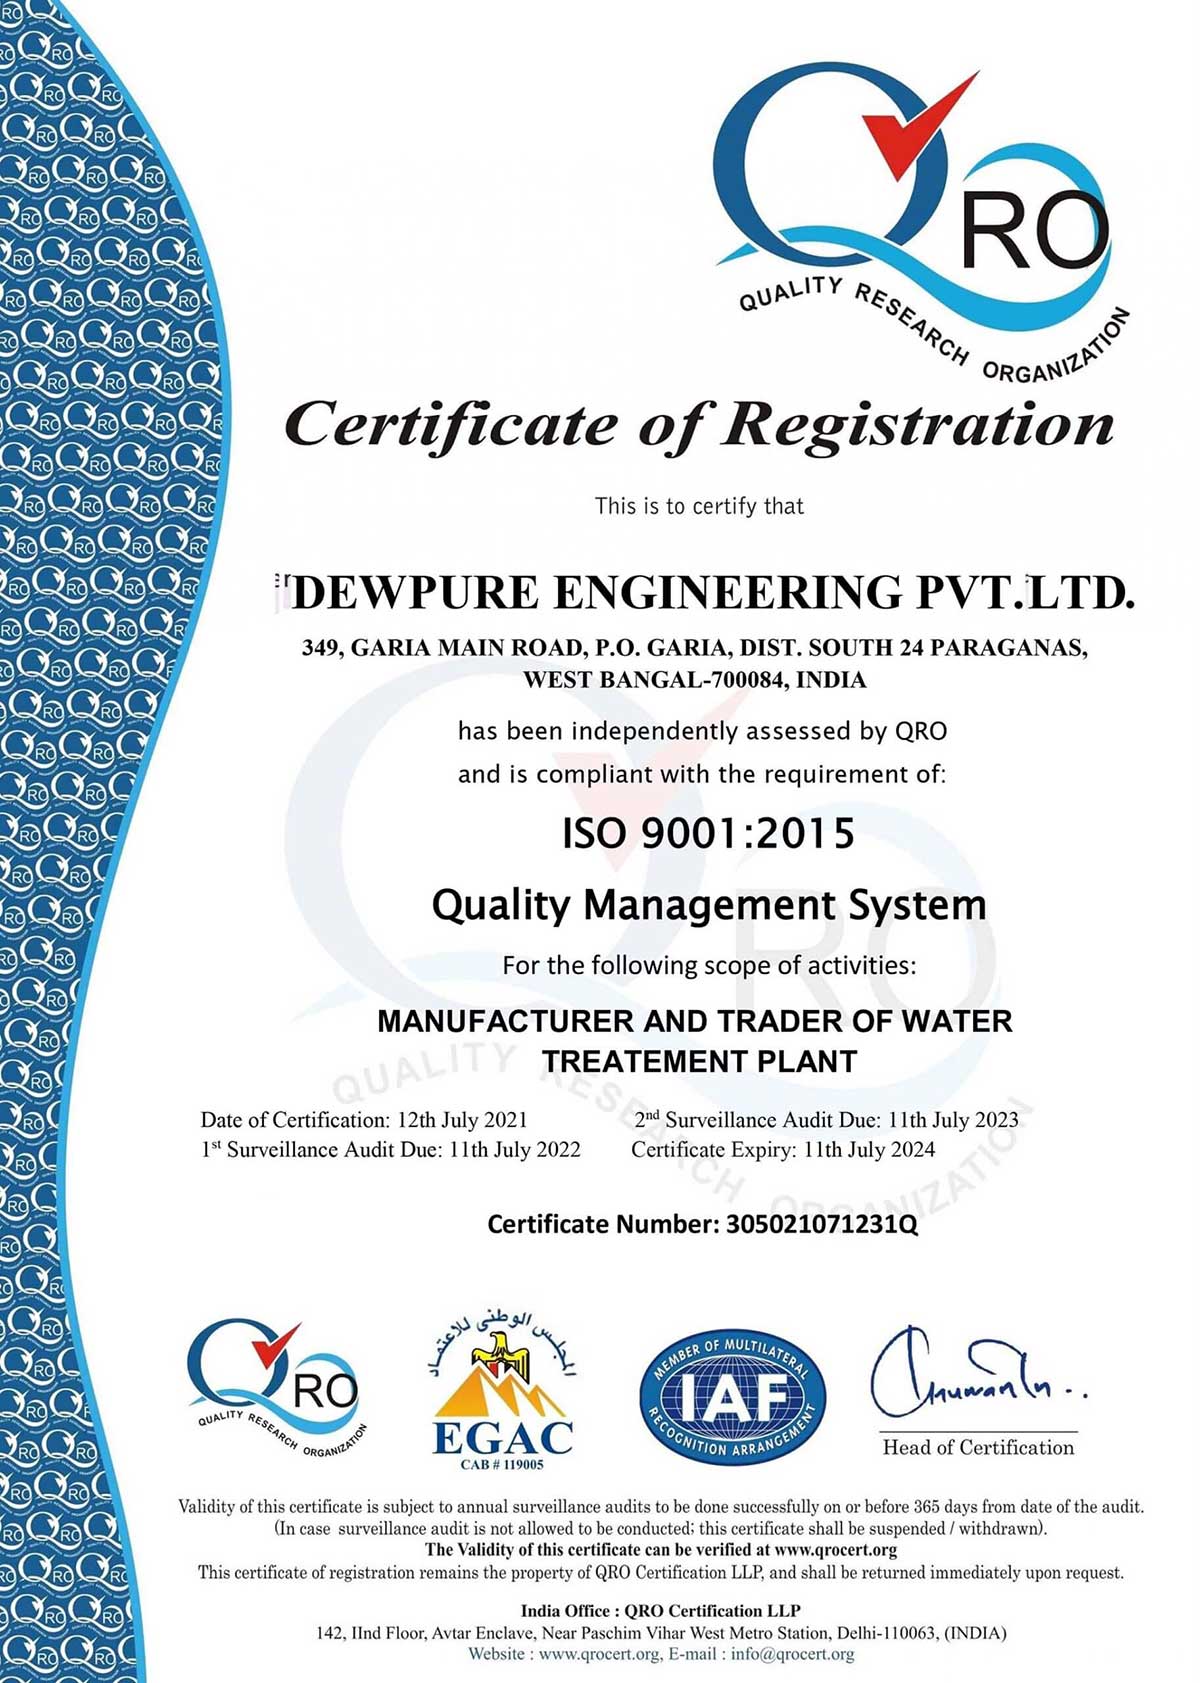 ISO Certificated